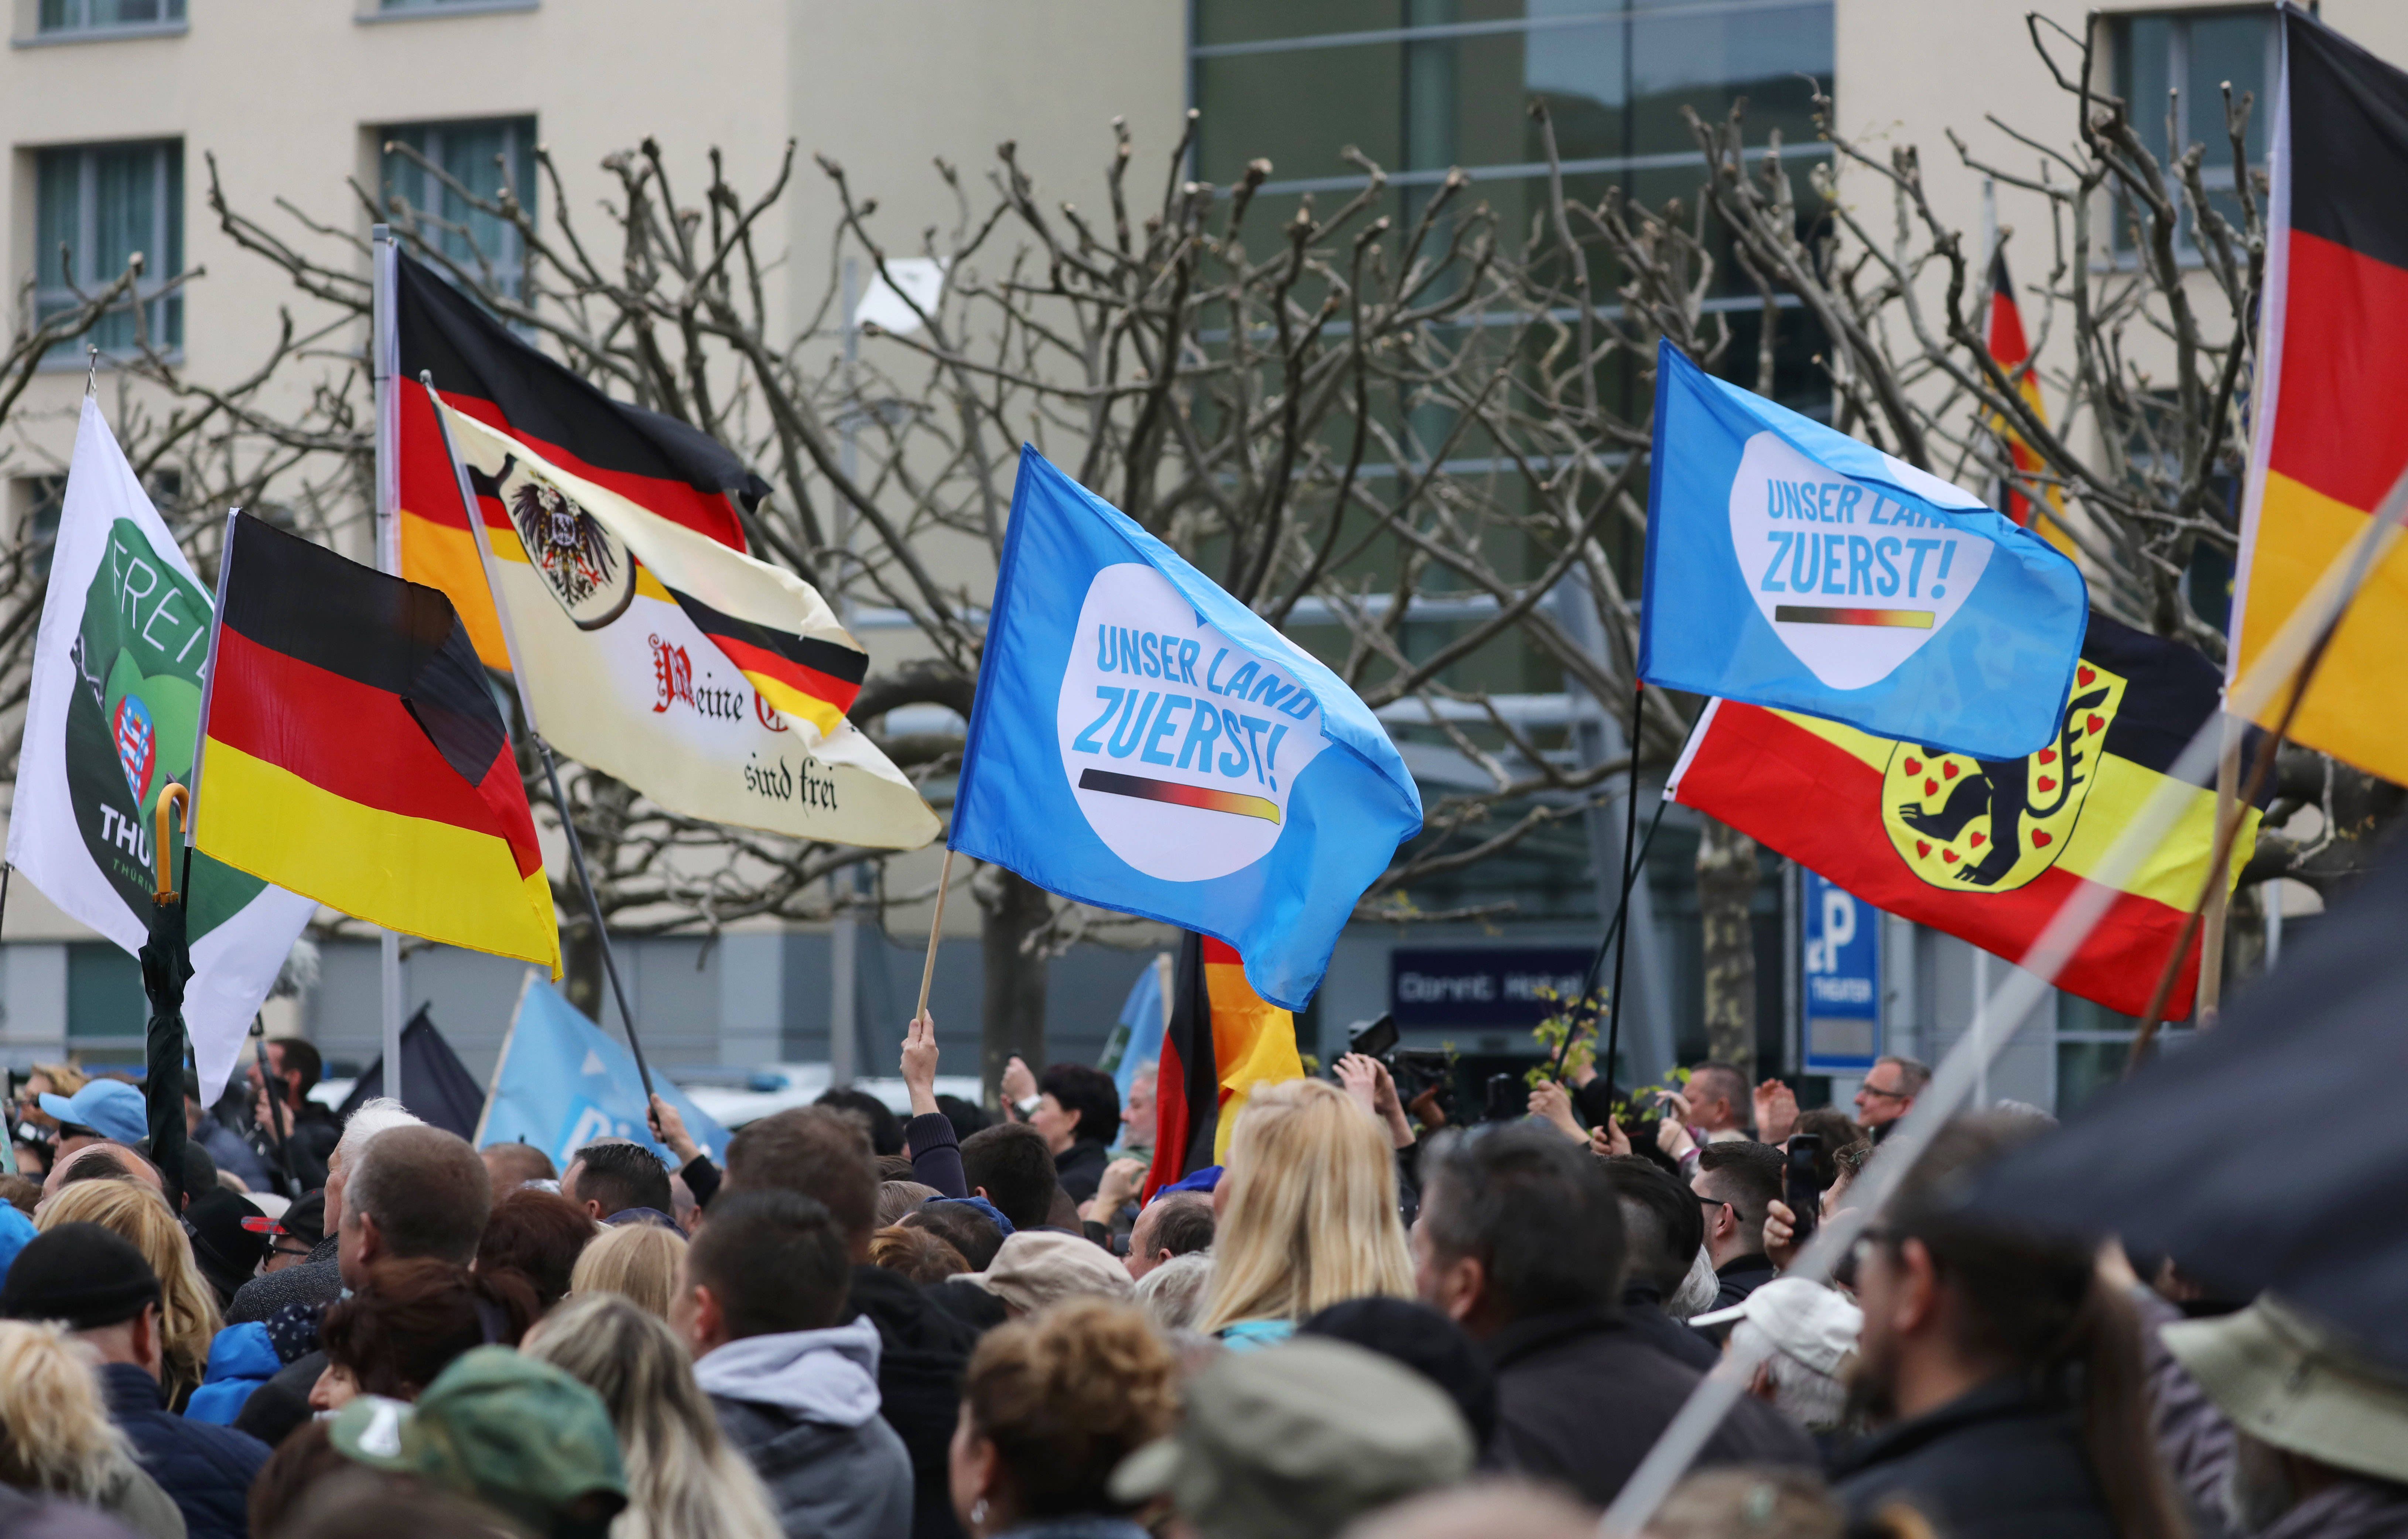 AfD holds "Future for Germany" rally in Erfurt.